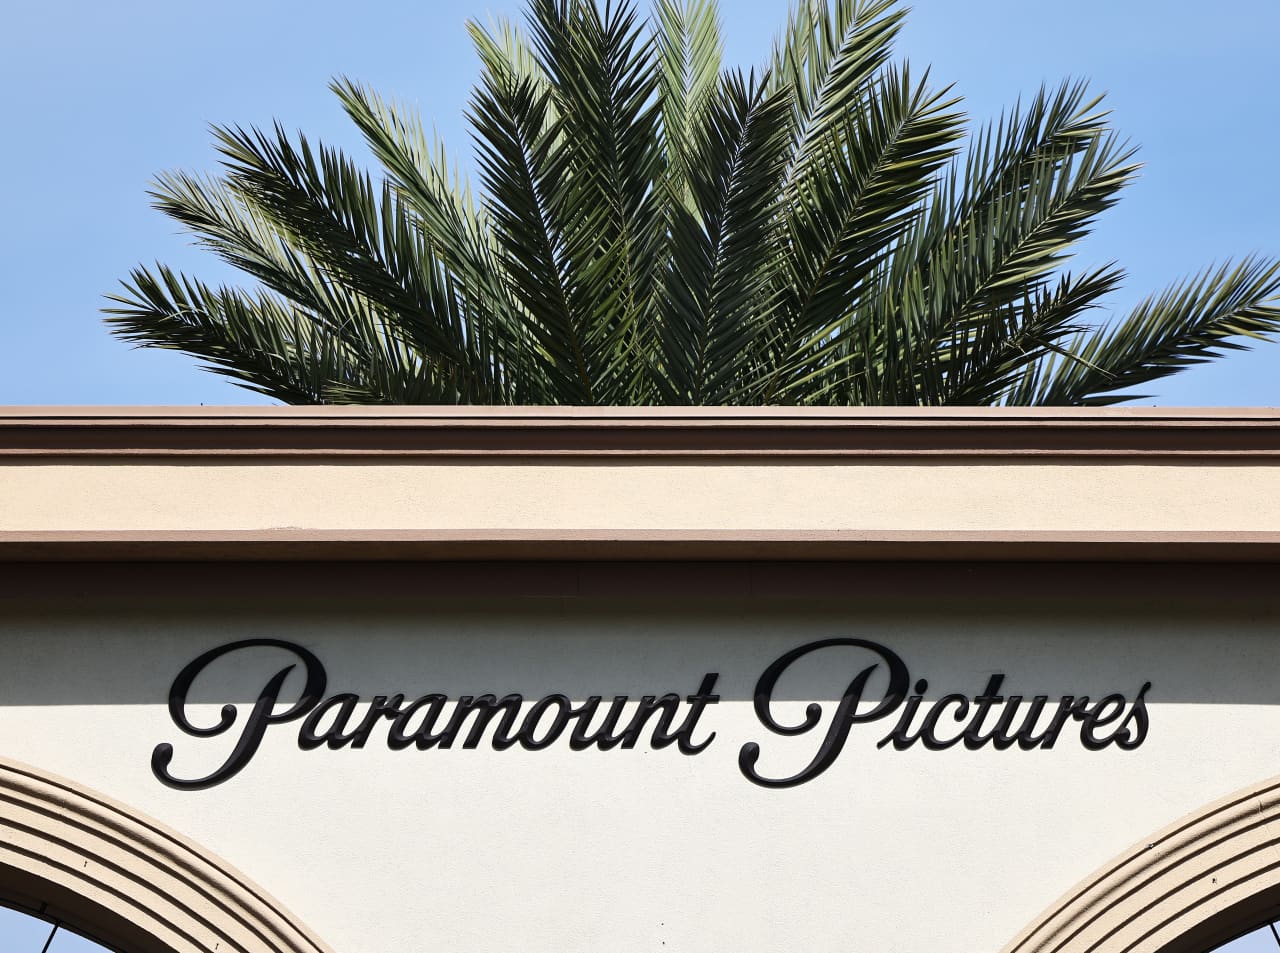 Paramount’s new ‘Office of the CEO’ now has a principal executive — while its ex-CEO will still collect a hefty paycheck